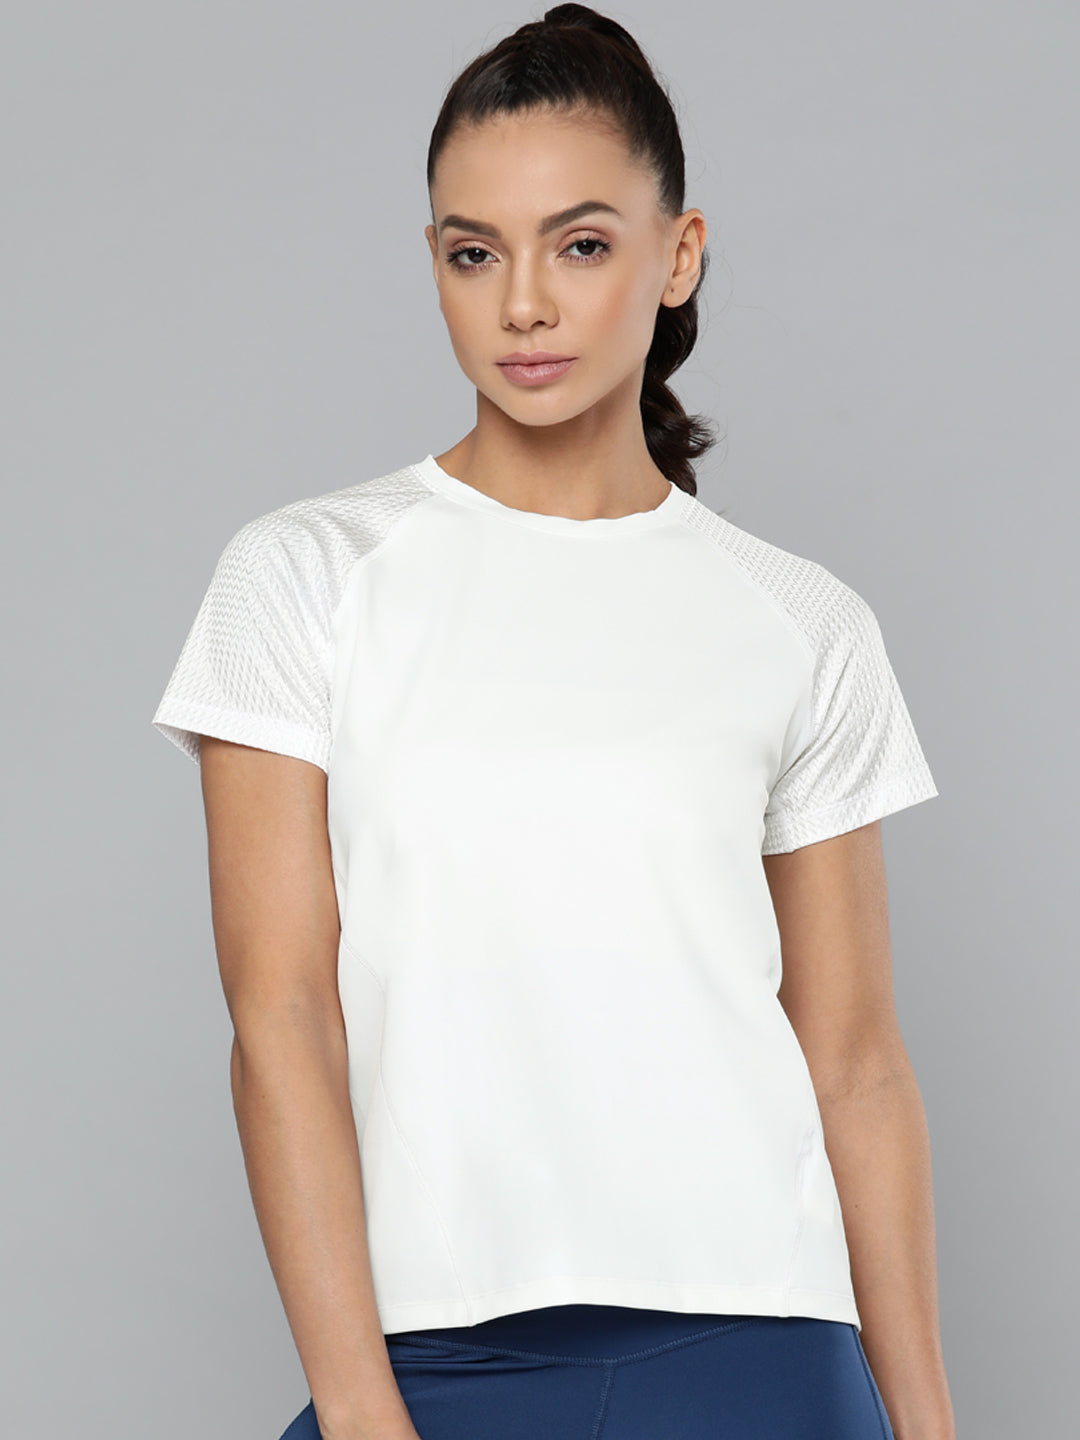 Women's White Training or Gym Solid T-shirt